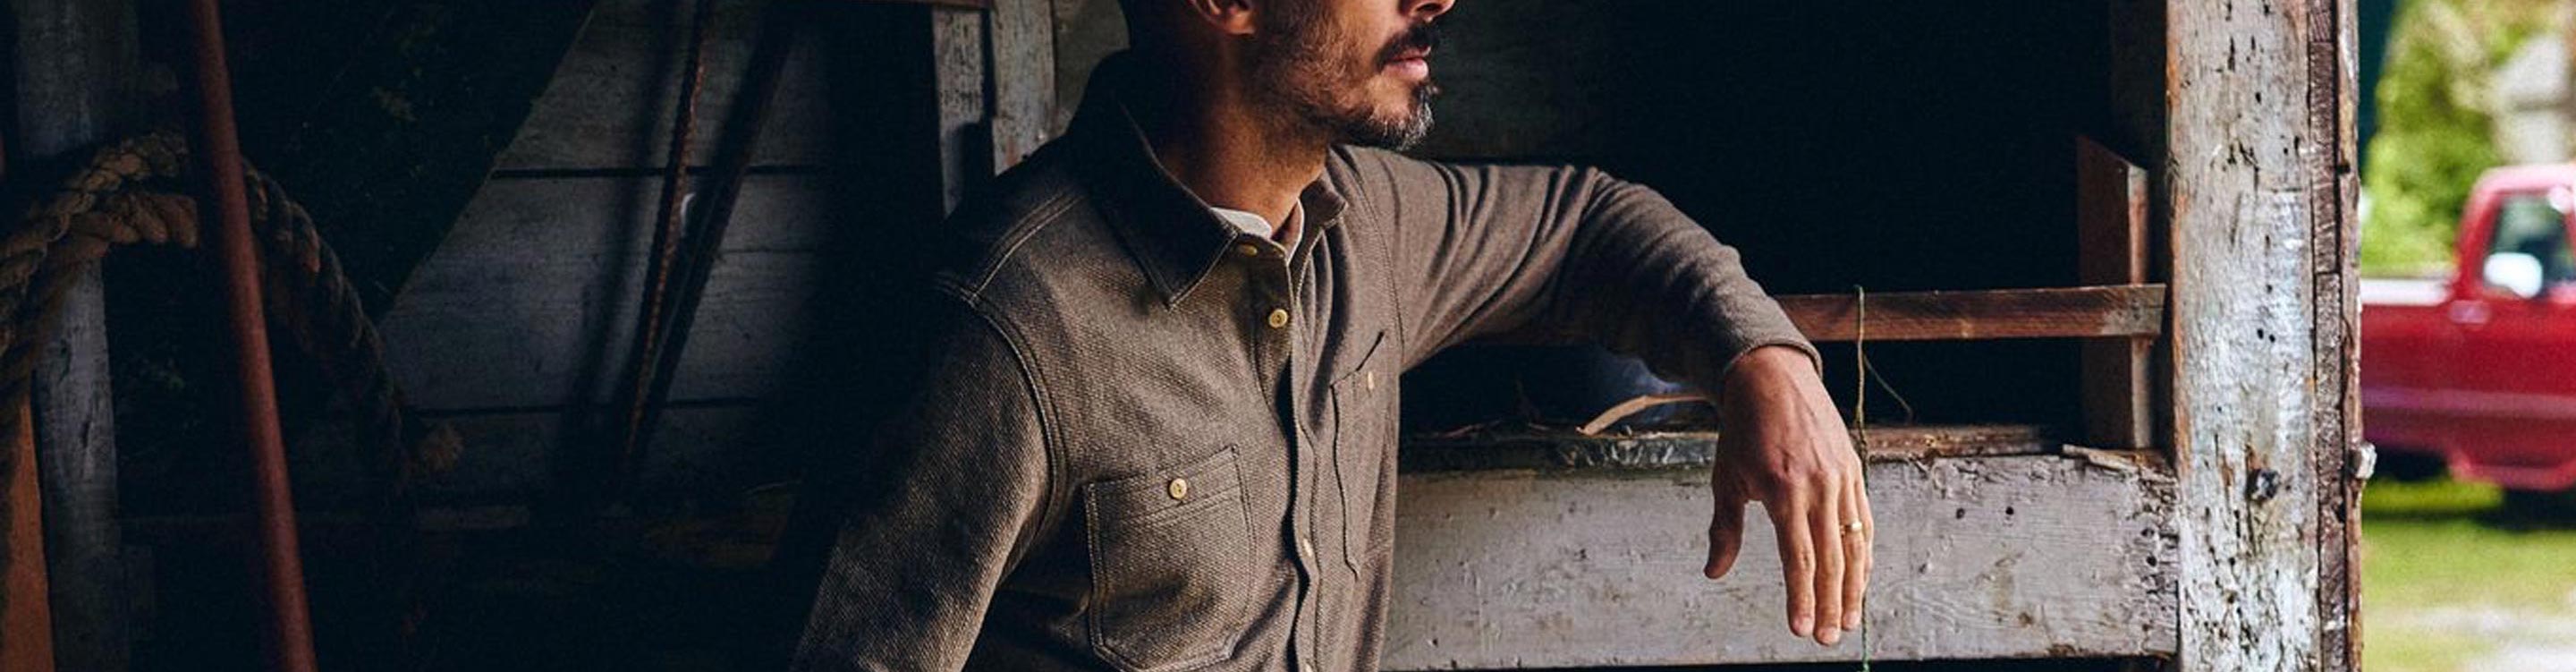 Stitch | Twill Knit Shirts The - Shirt Men Knit for in Taylor Utility